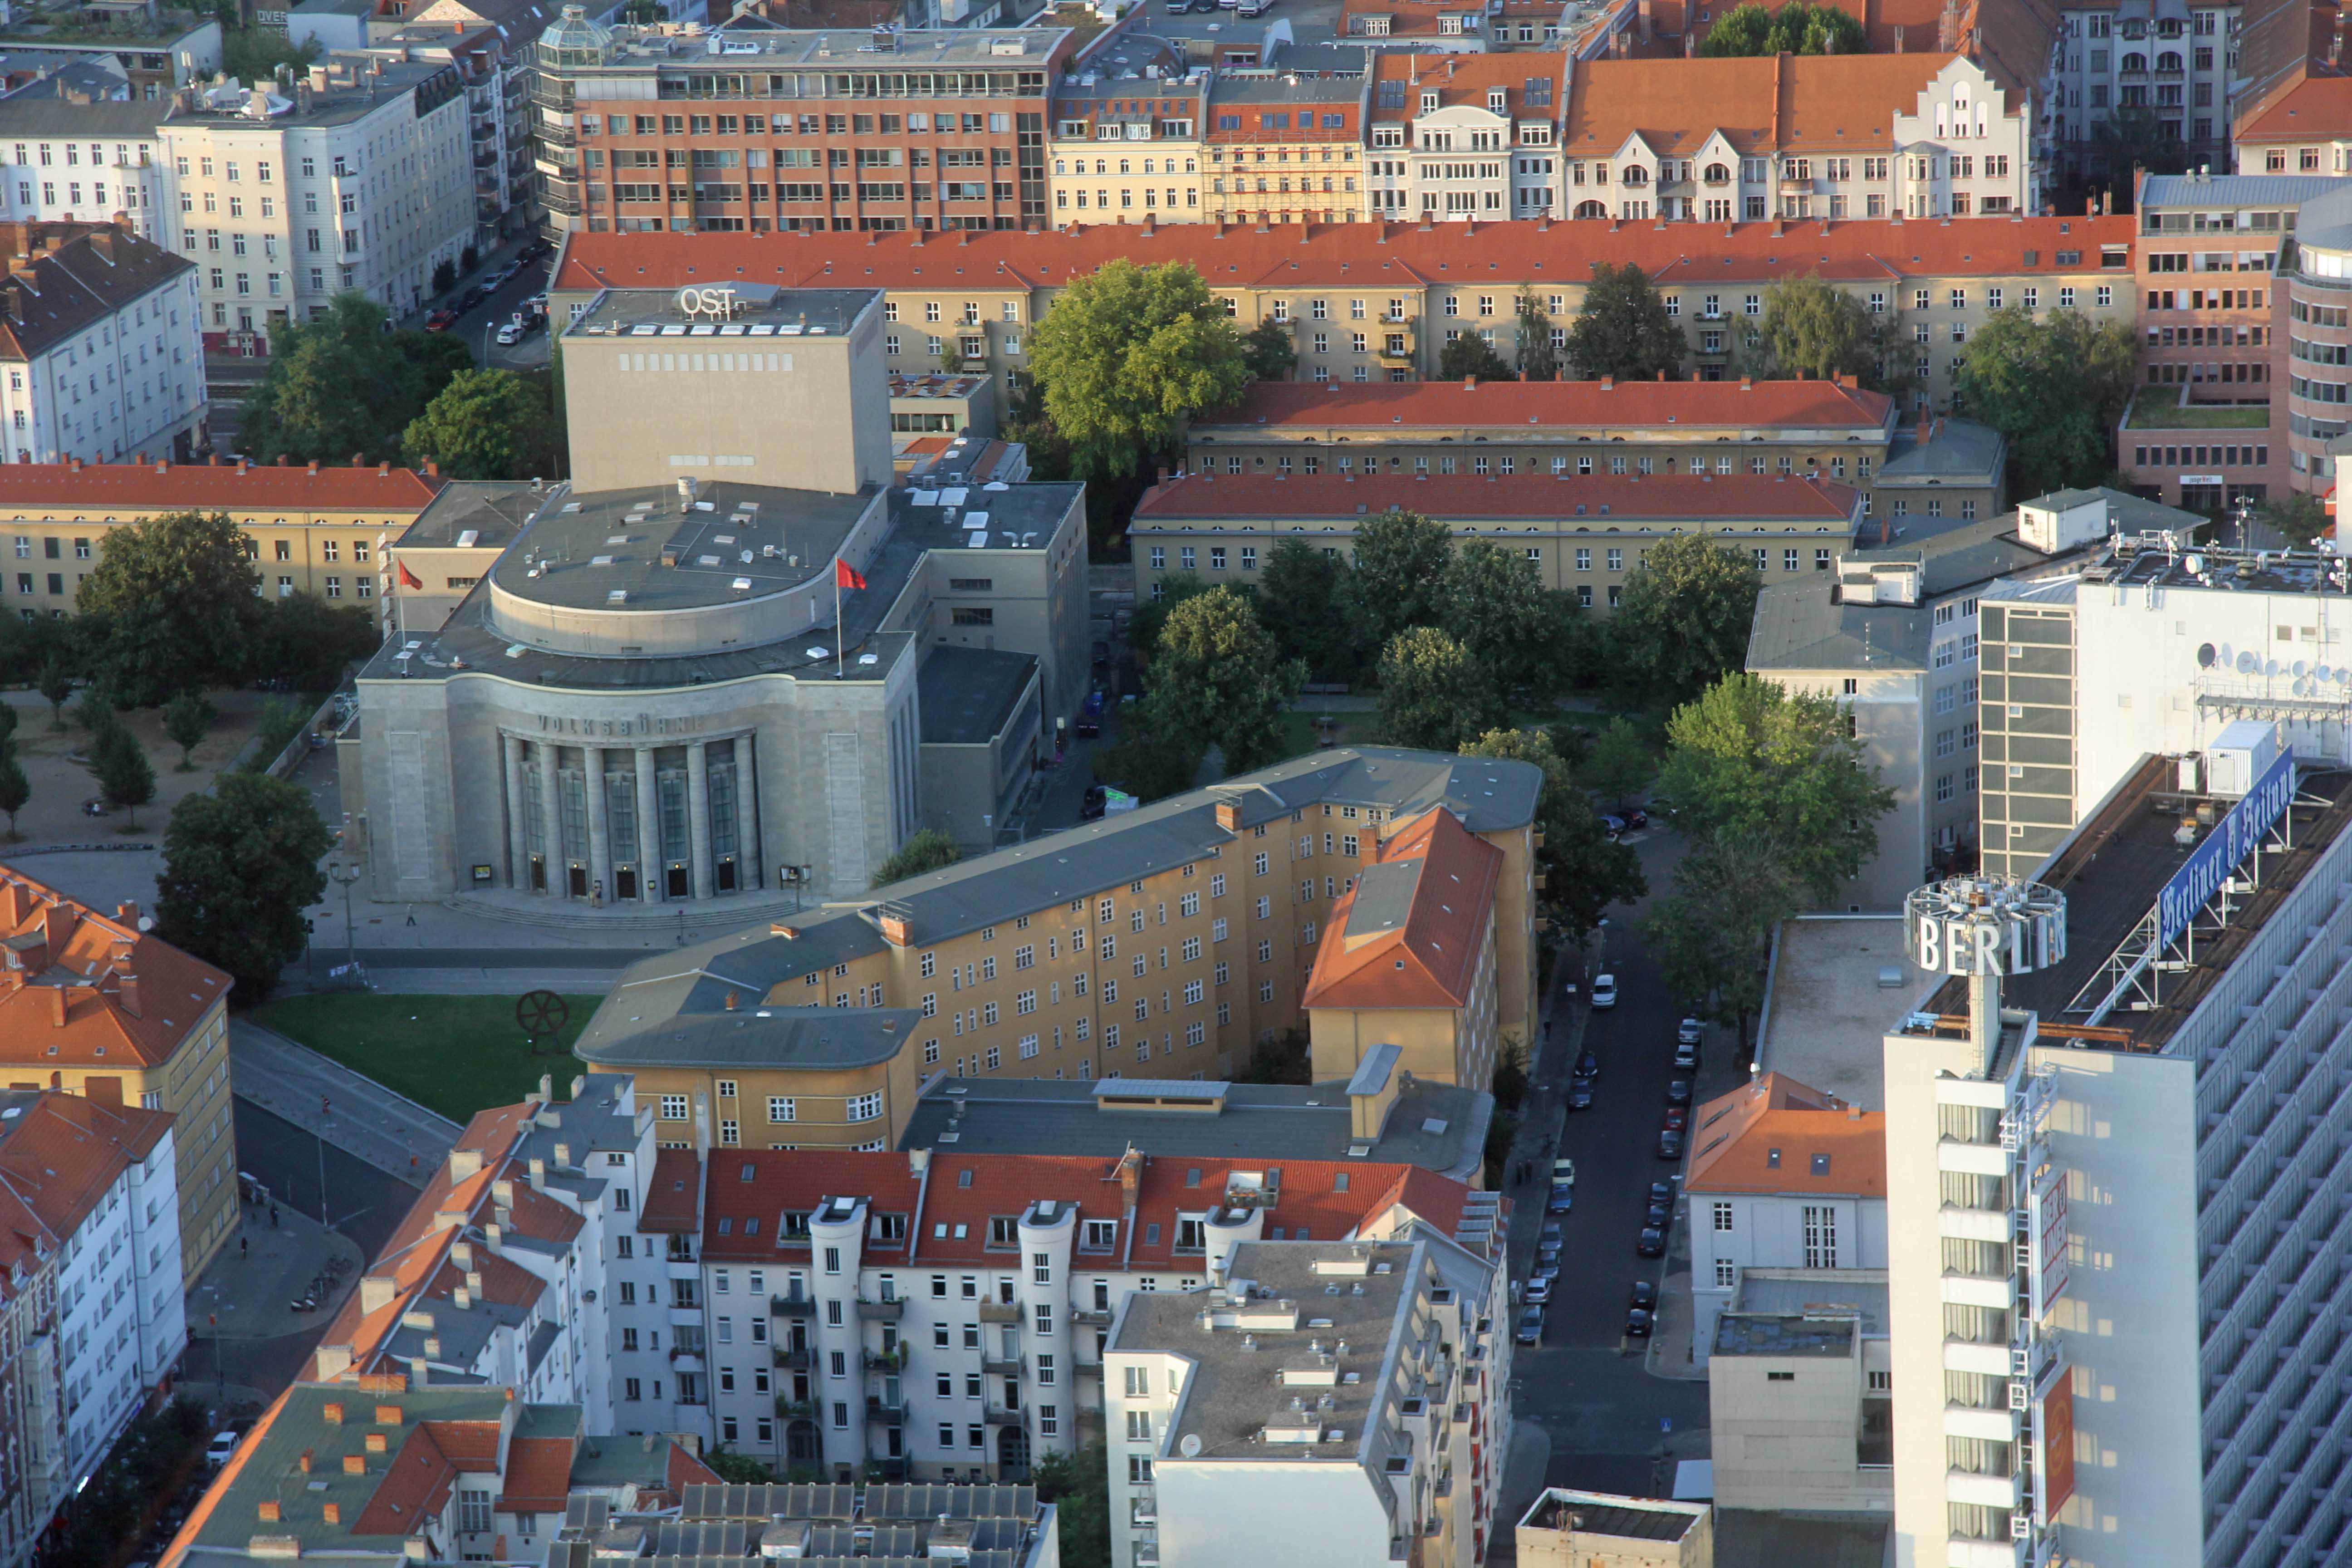 The Volksbühne and surrounding area in Berlin from the Fernehturm (TV Tower) at Alexanderplatz